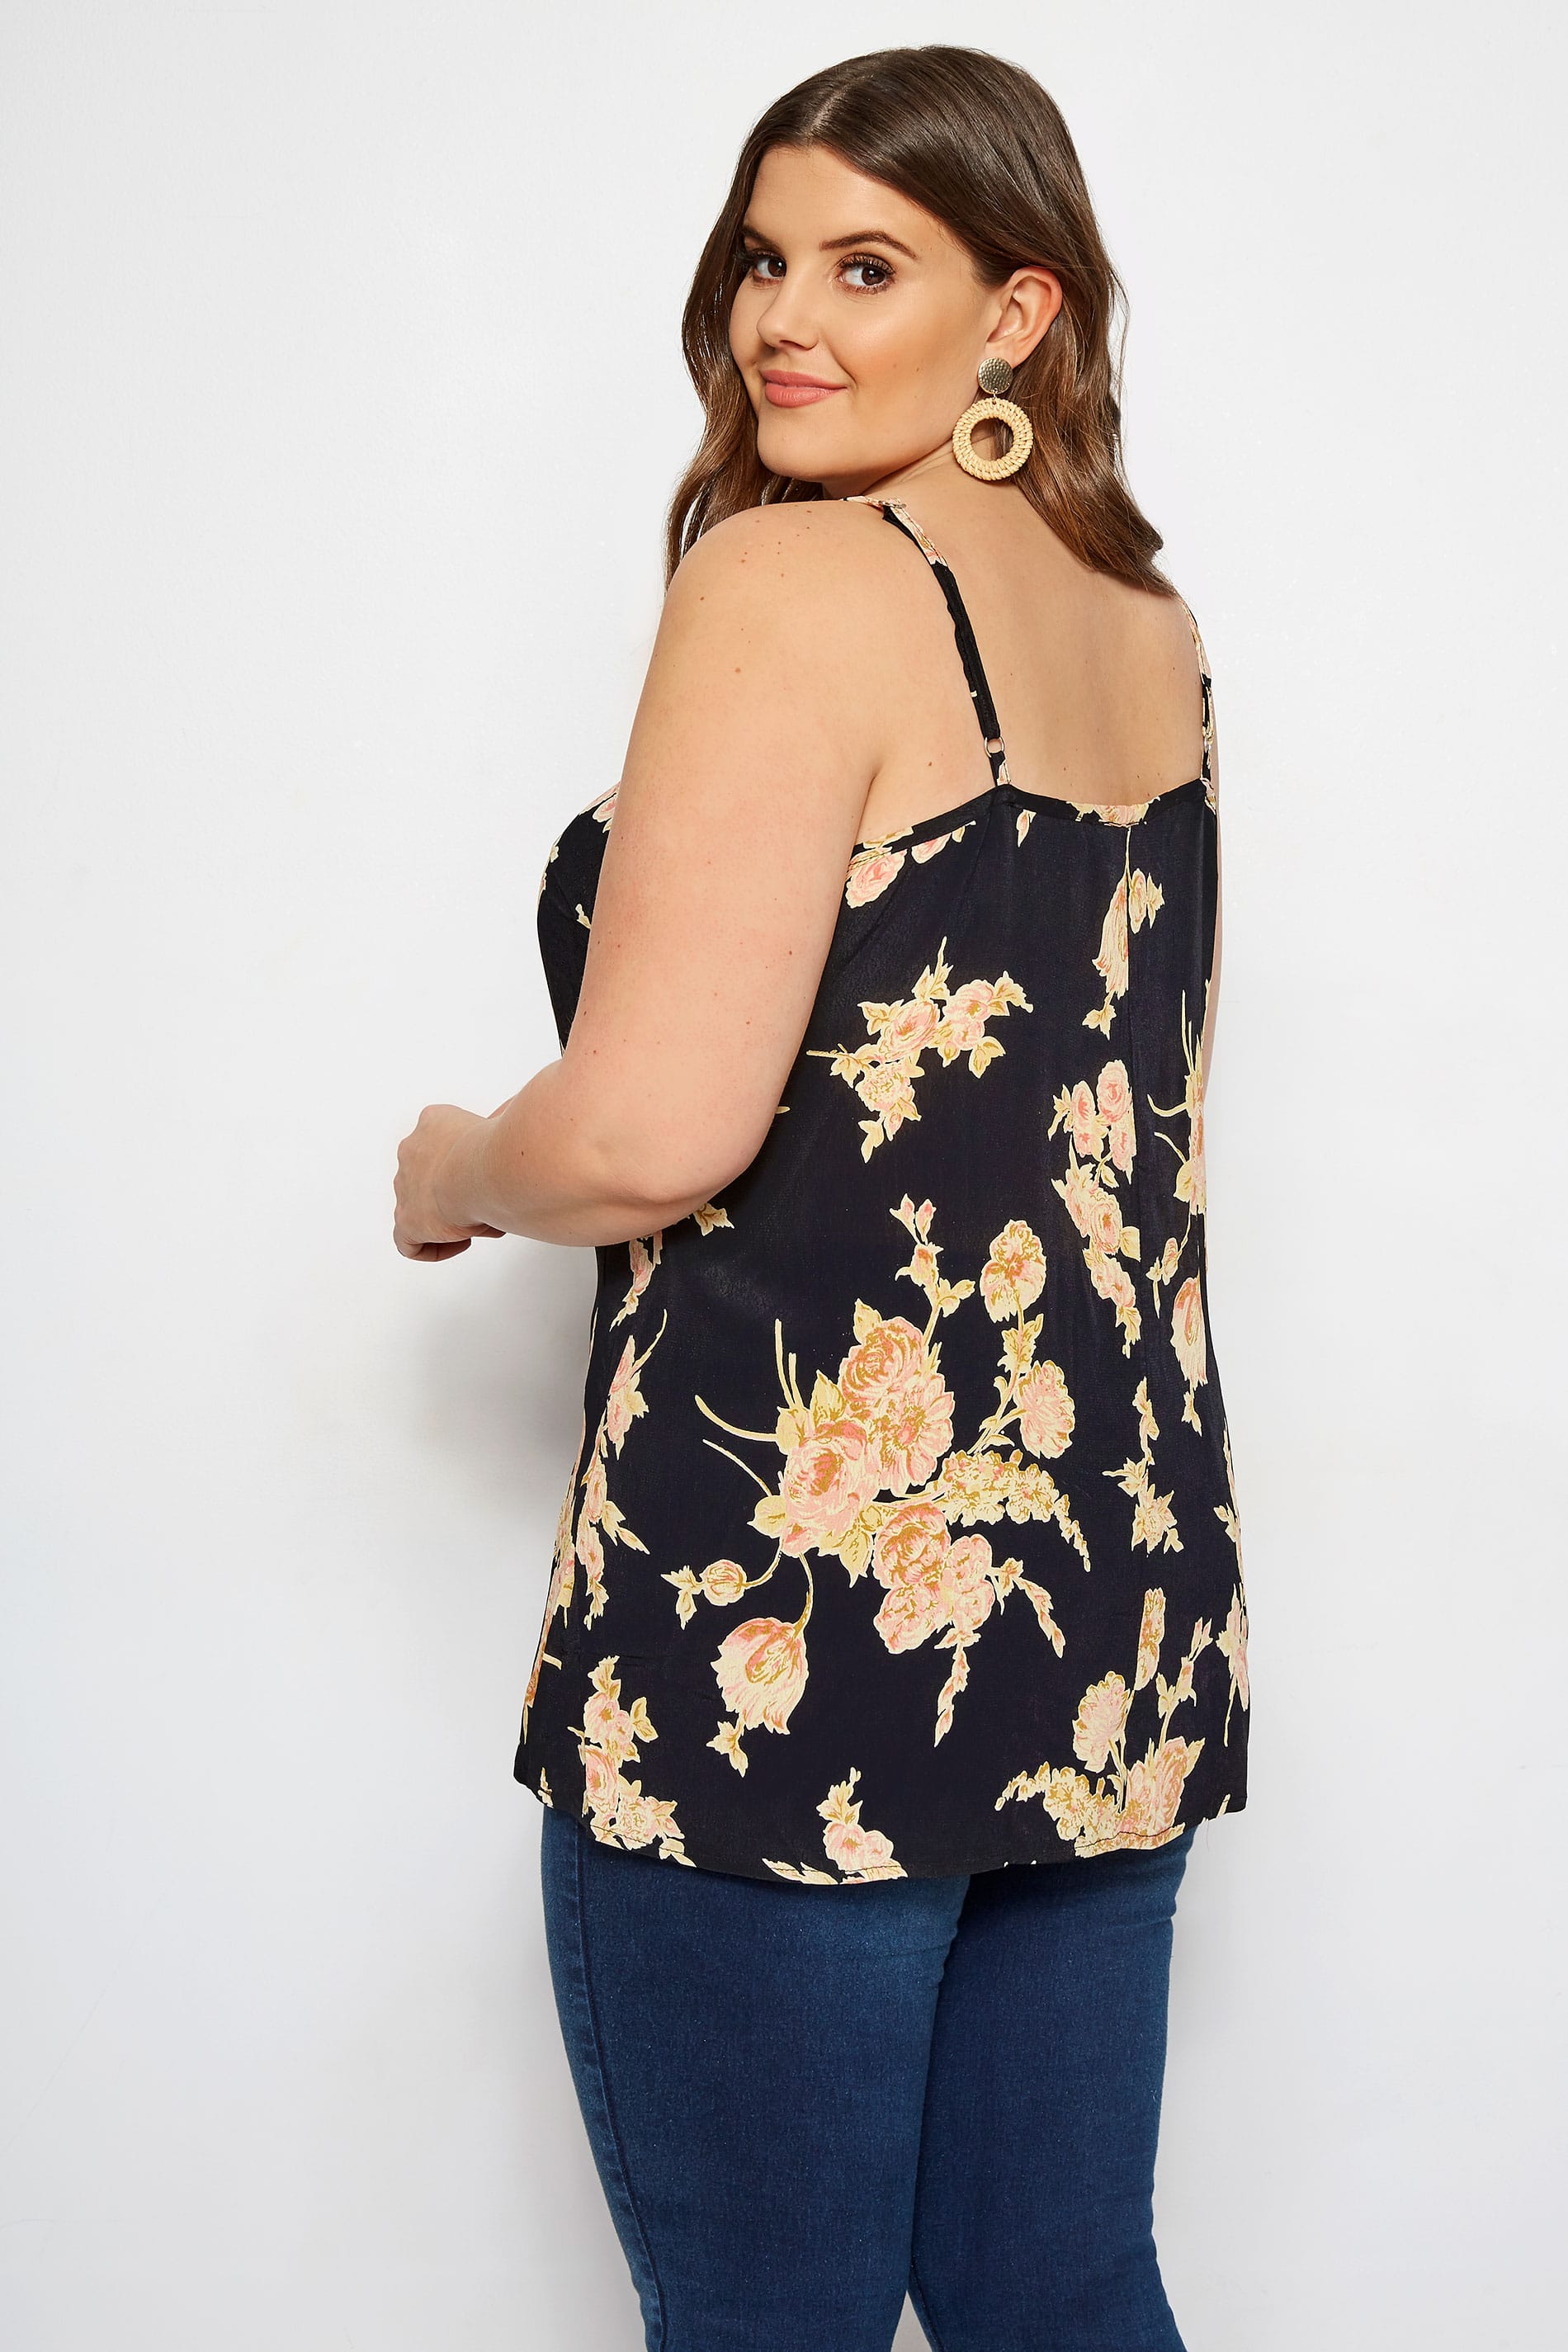 Plus Size Black & Dusky Pink Floral Cami | Sizes 16 to 32 | Yours Clothing